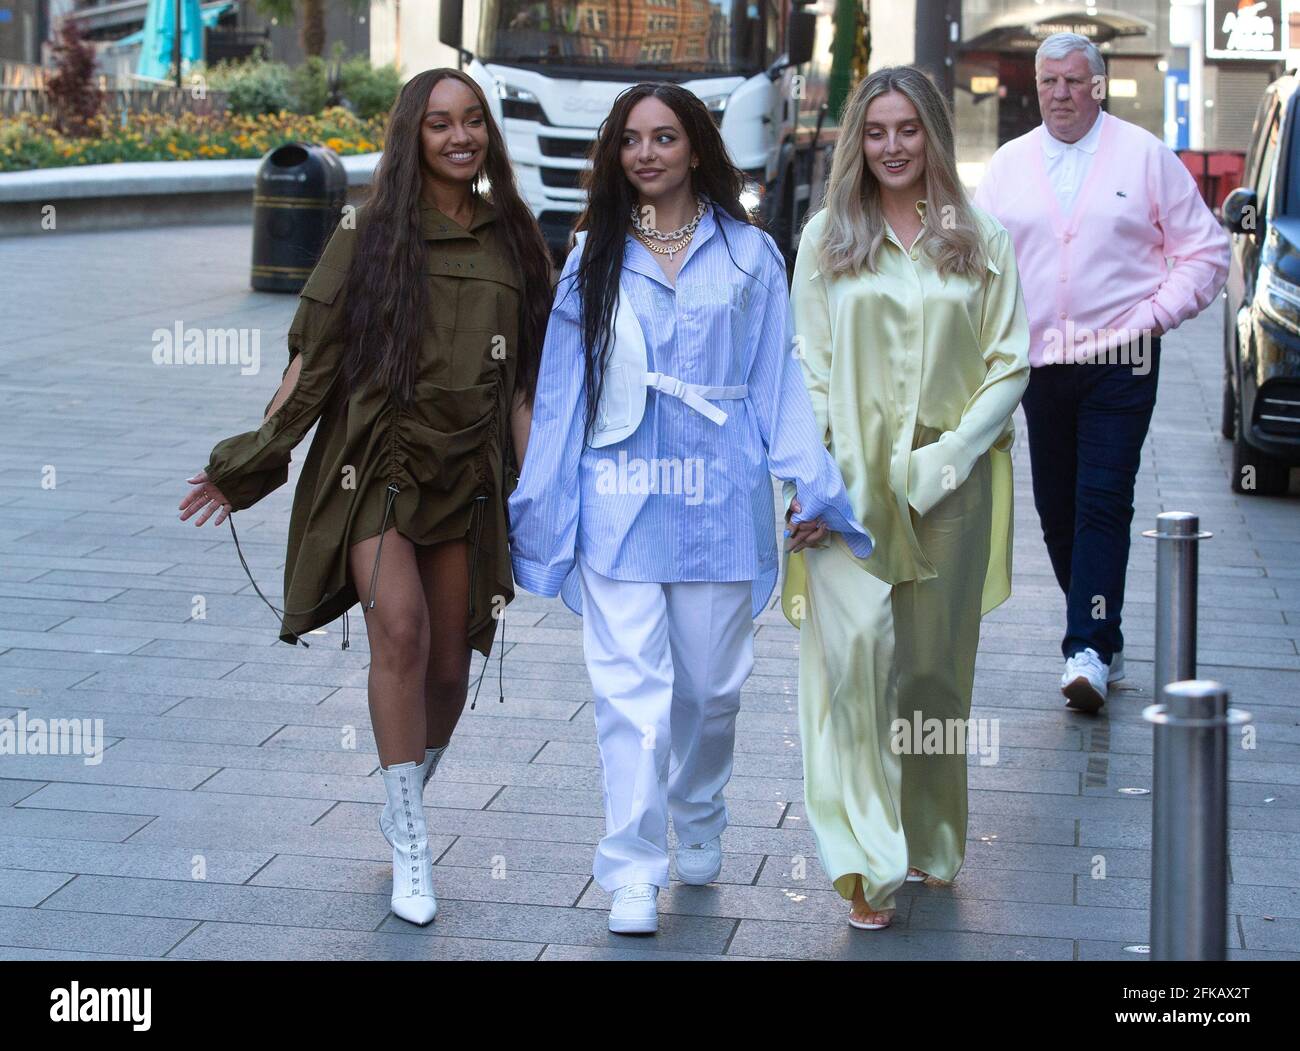 London, UK. 30th April 2021. Little Mix, Leigh-Anne Pinnock, Jade Thirlwall and Perrie Edwards, arrive at the studios of Global Radio in Leicester Square for interviews and photographs. Credit: Tommy London/Alamy Live News Stock Photo